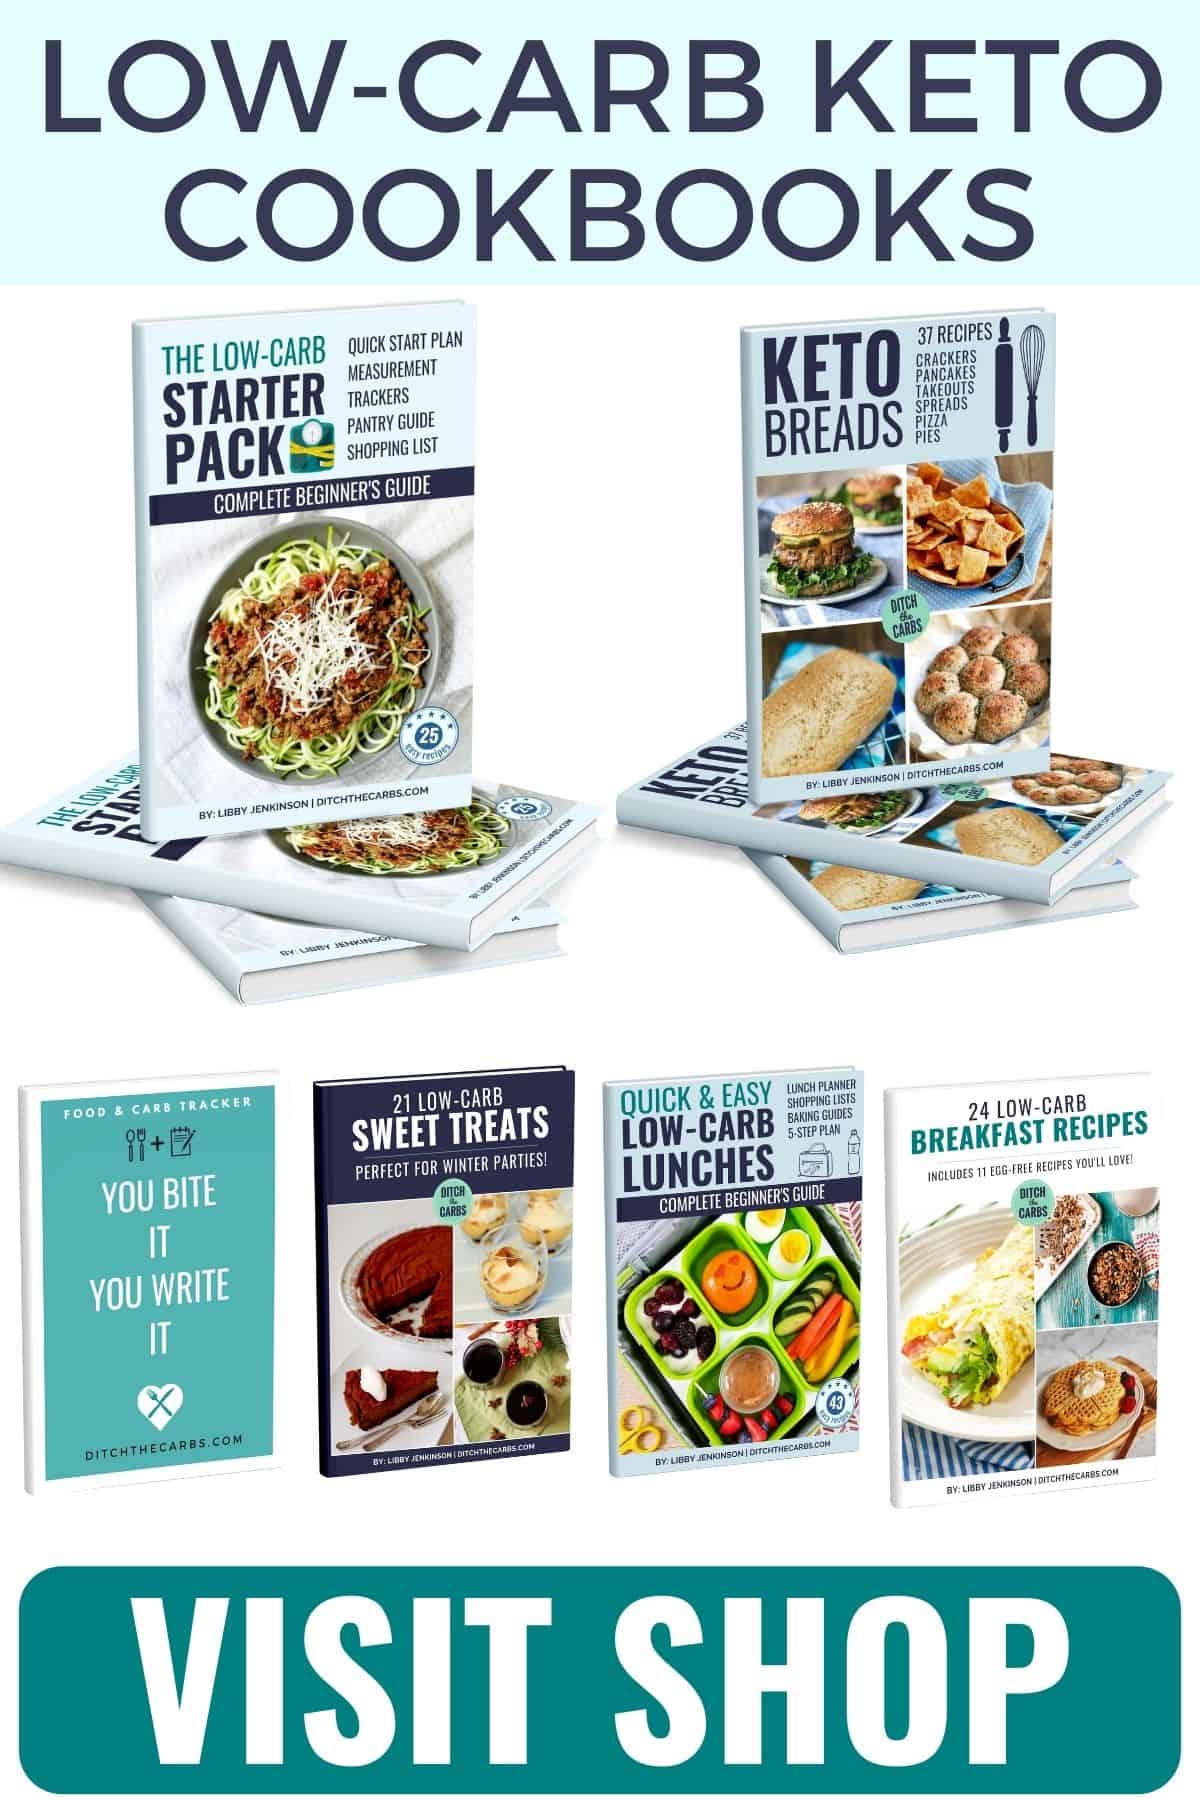 low-carb and keto cookbooks